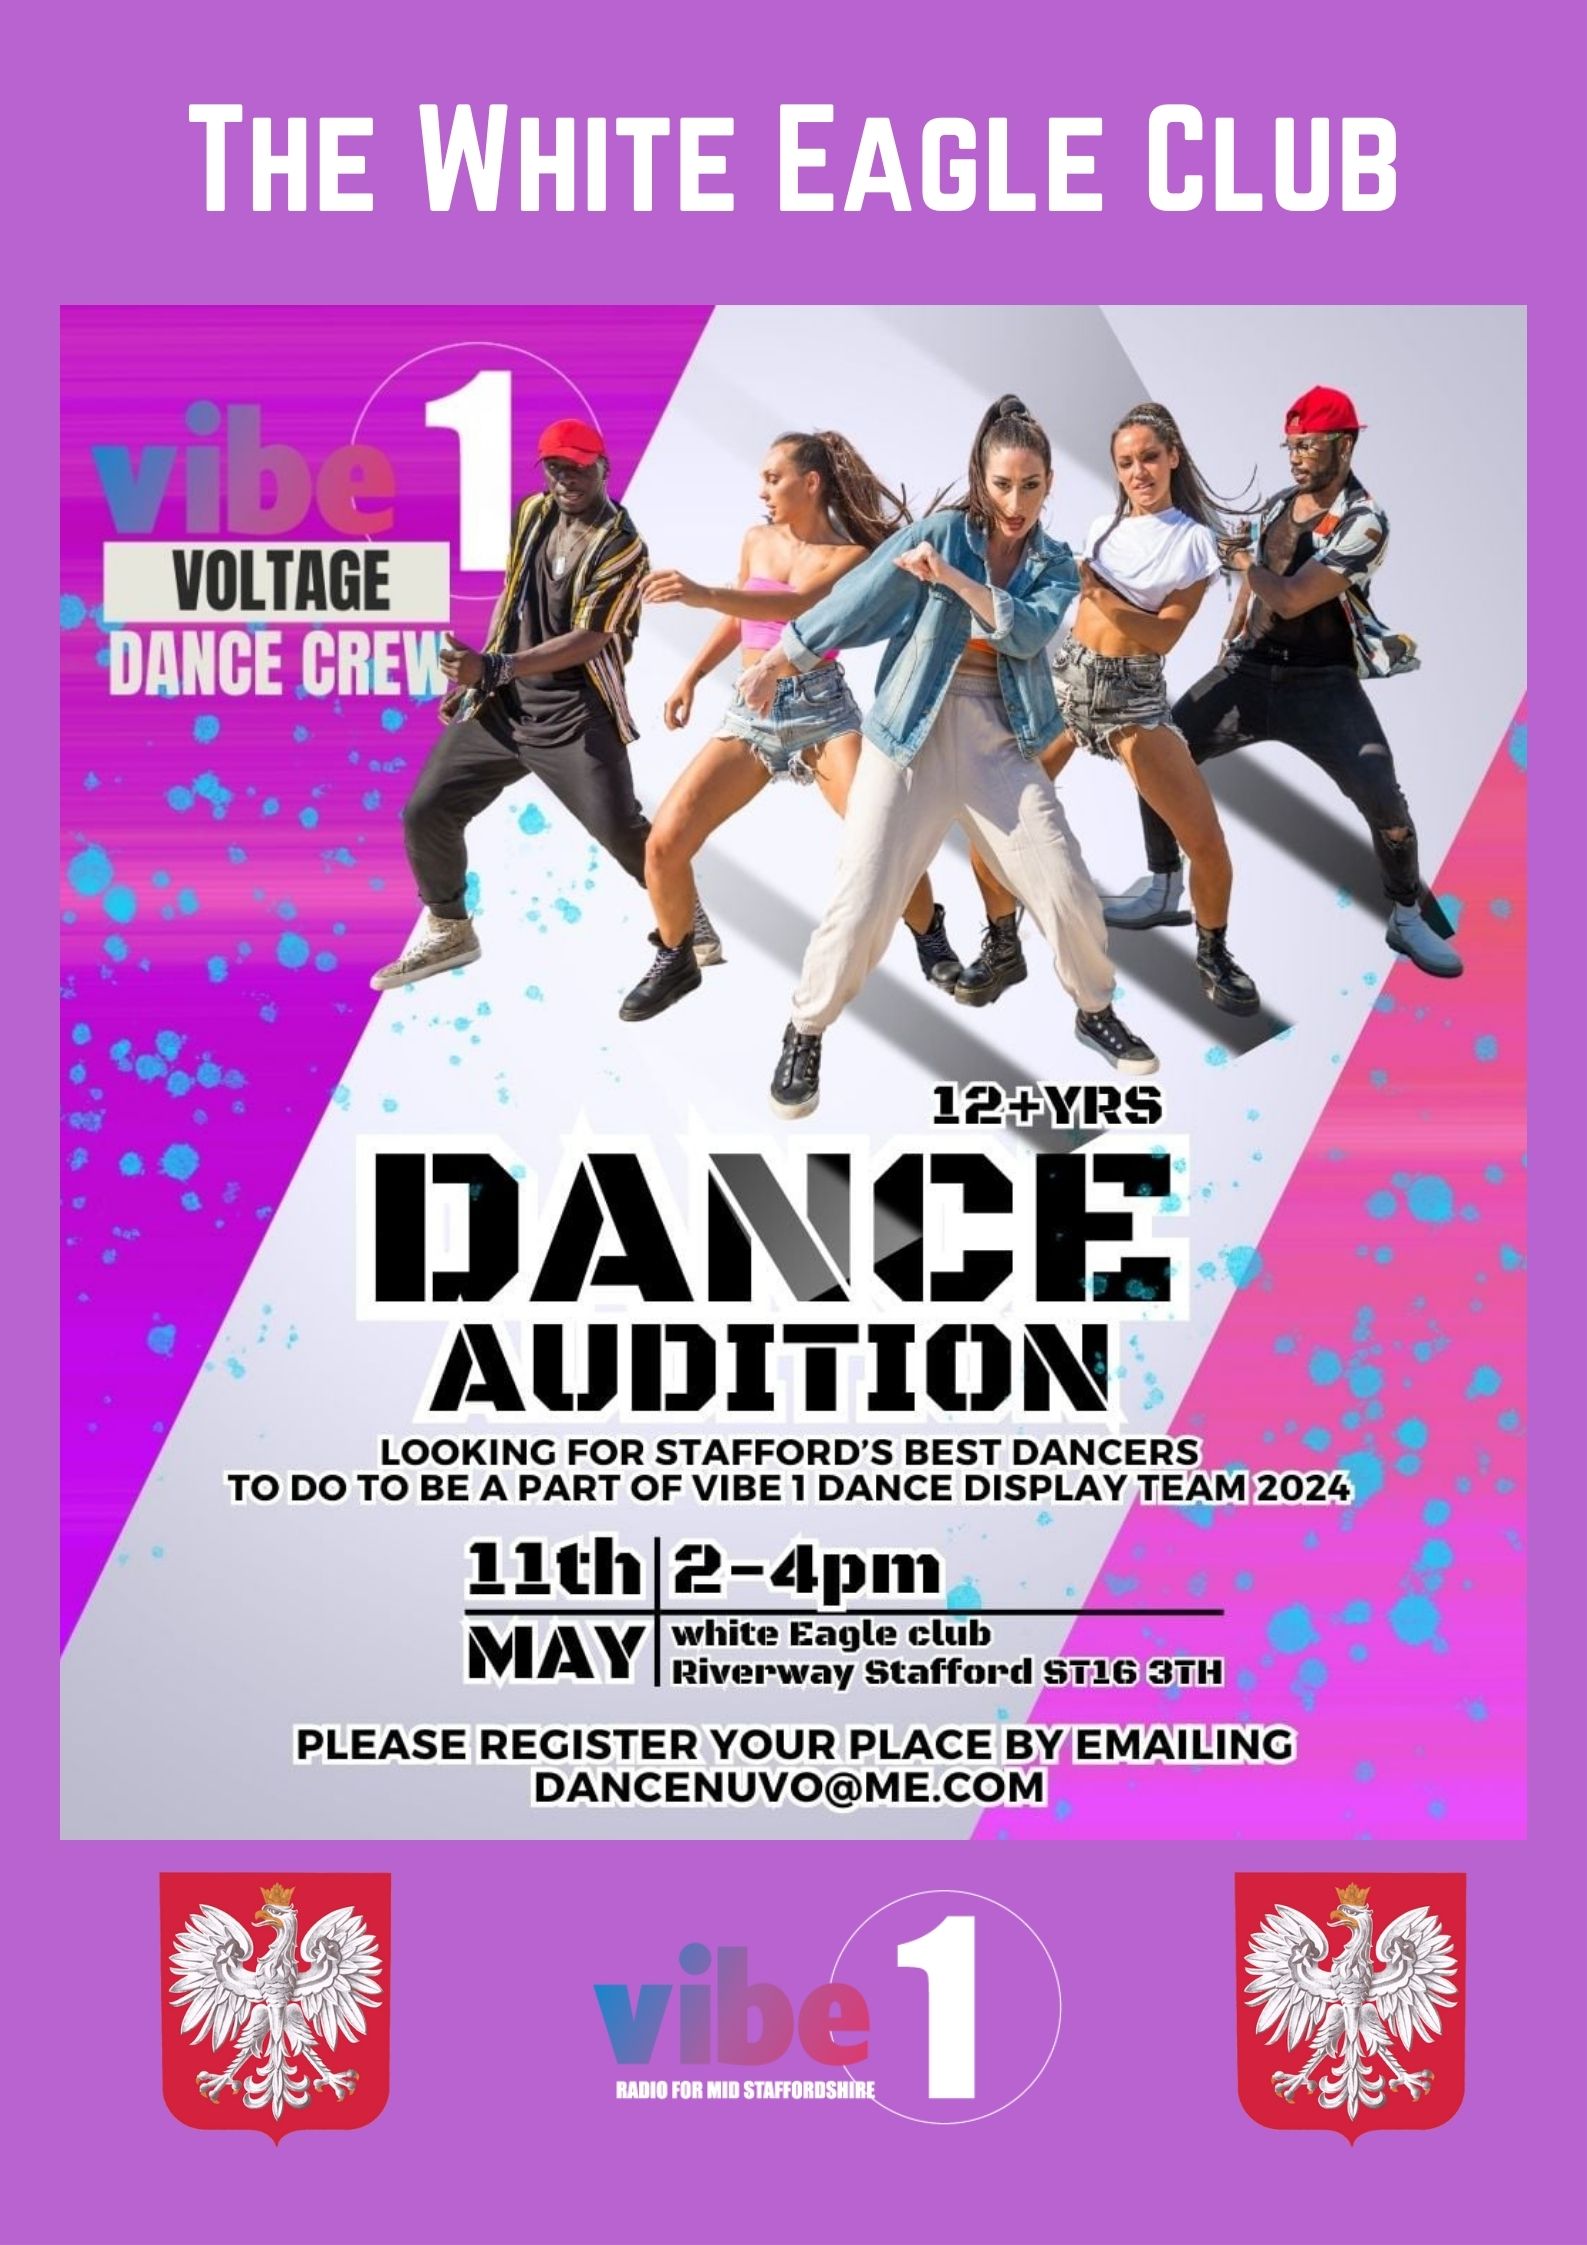 Vibe1 'Voltage' Dance Crew Auditions 